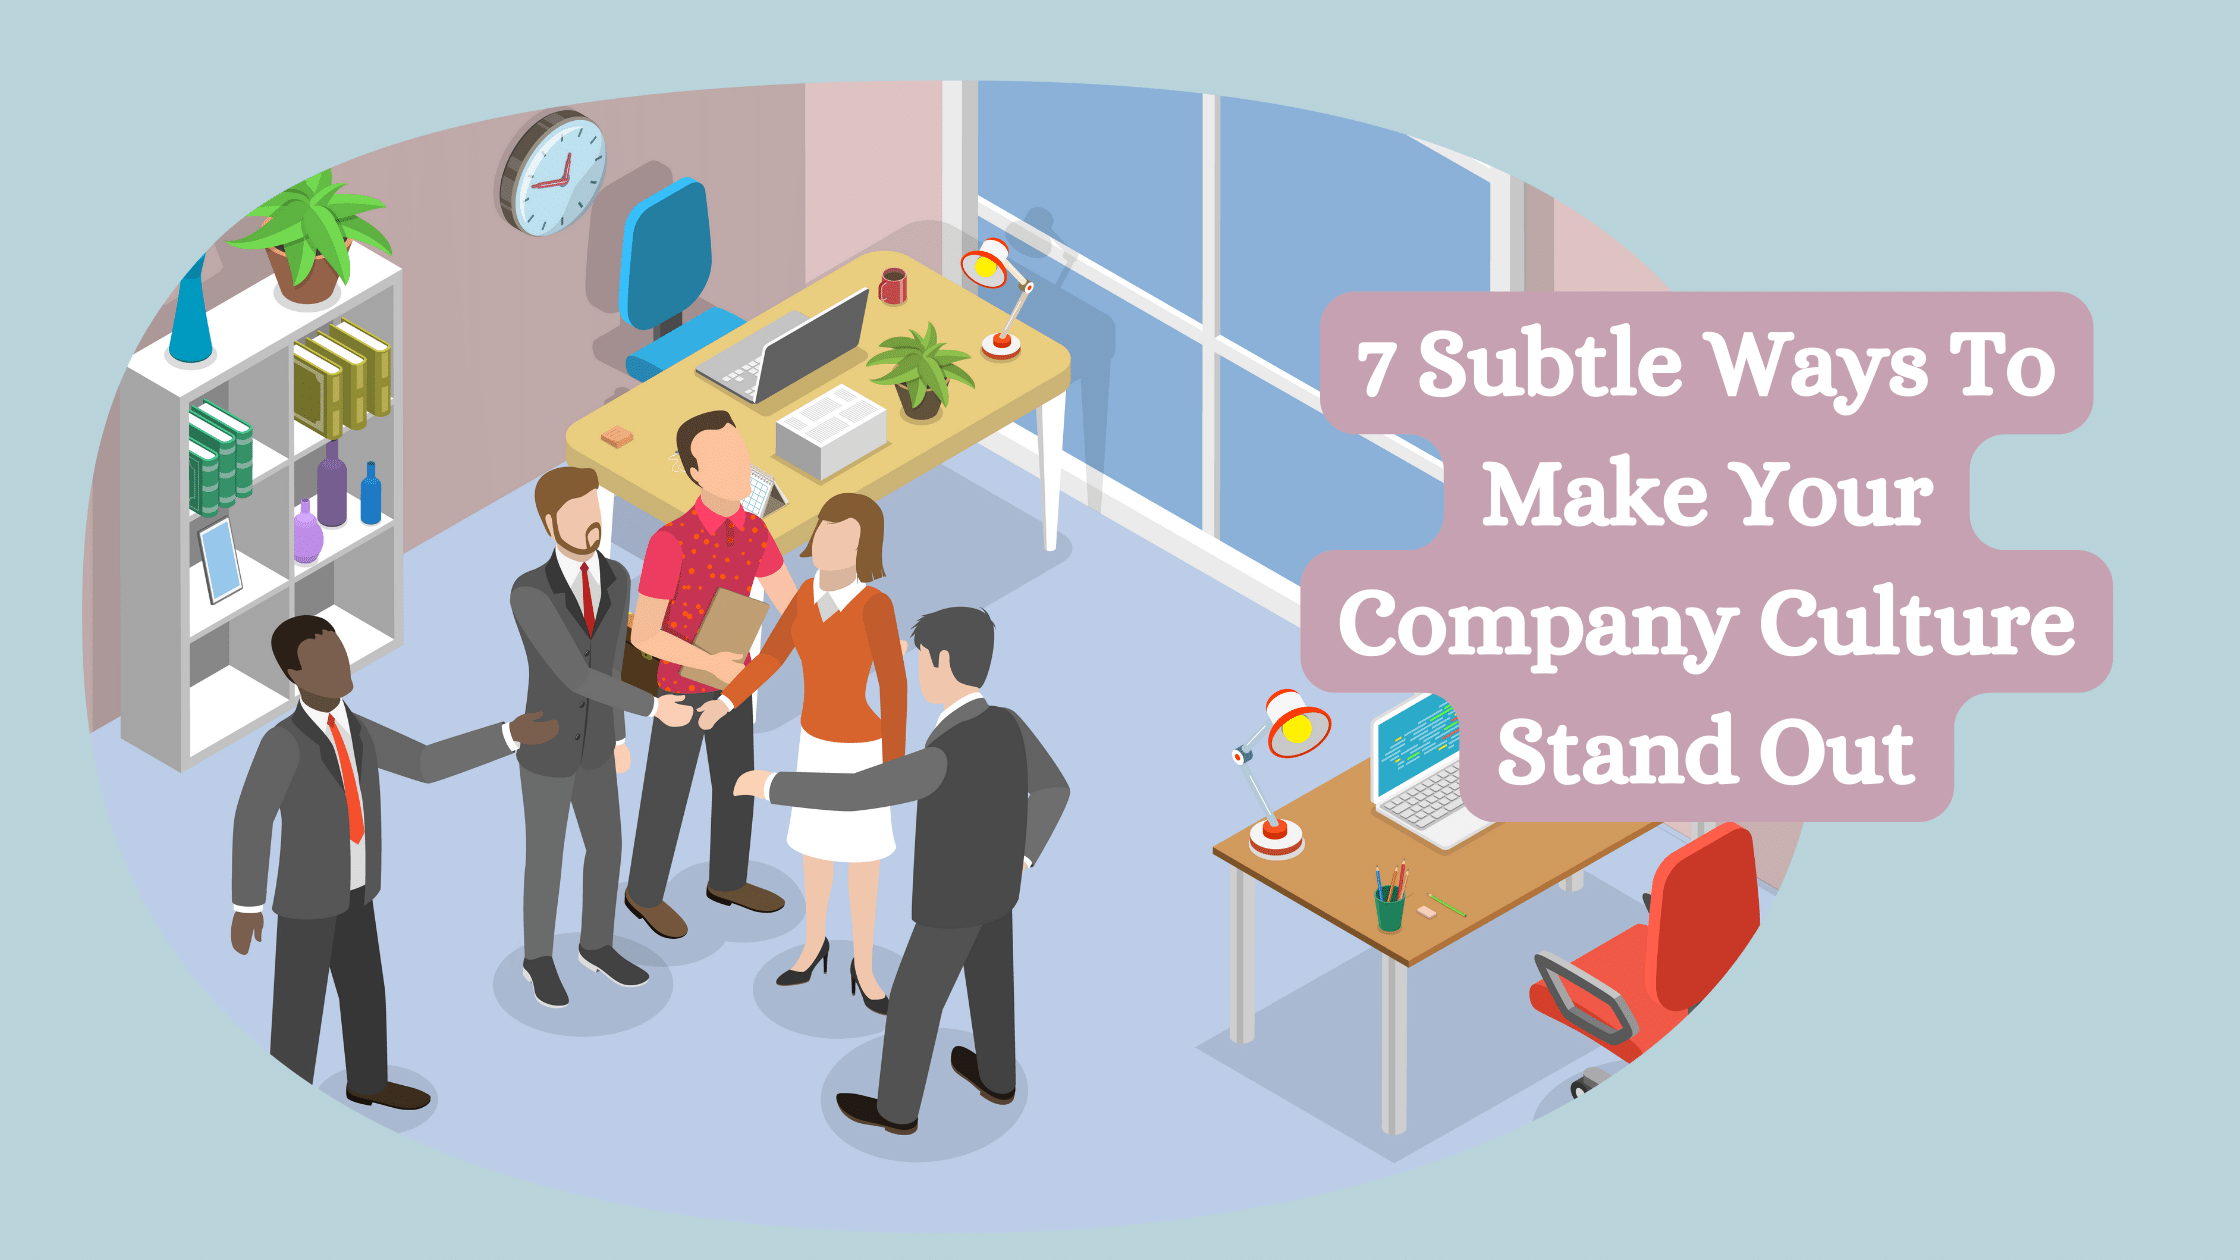 Subtle Ways To Make Your Company Culture Stand Out